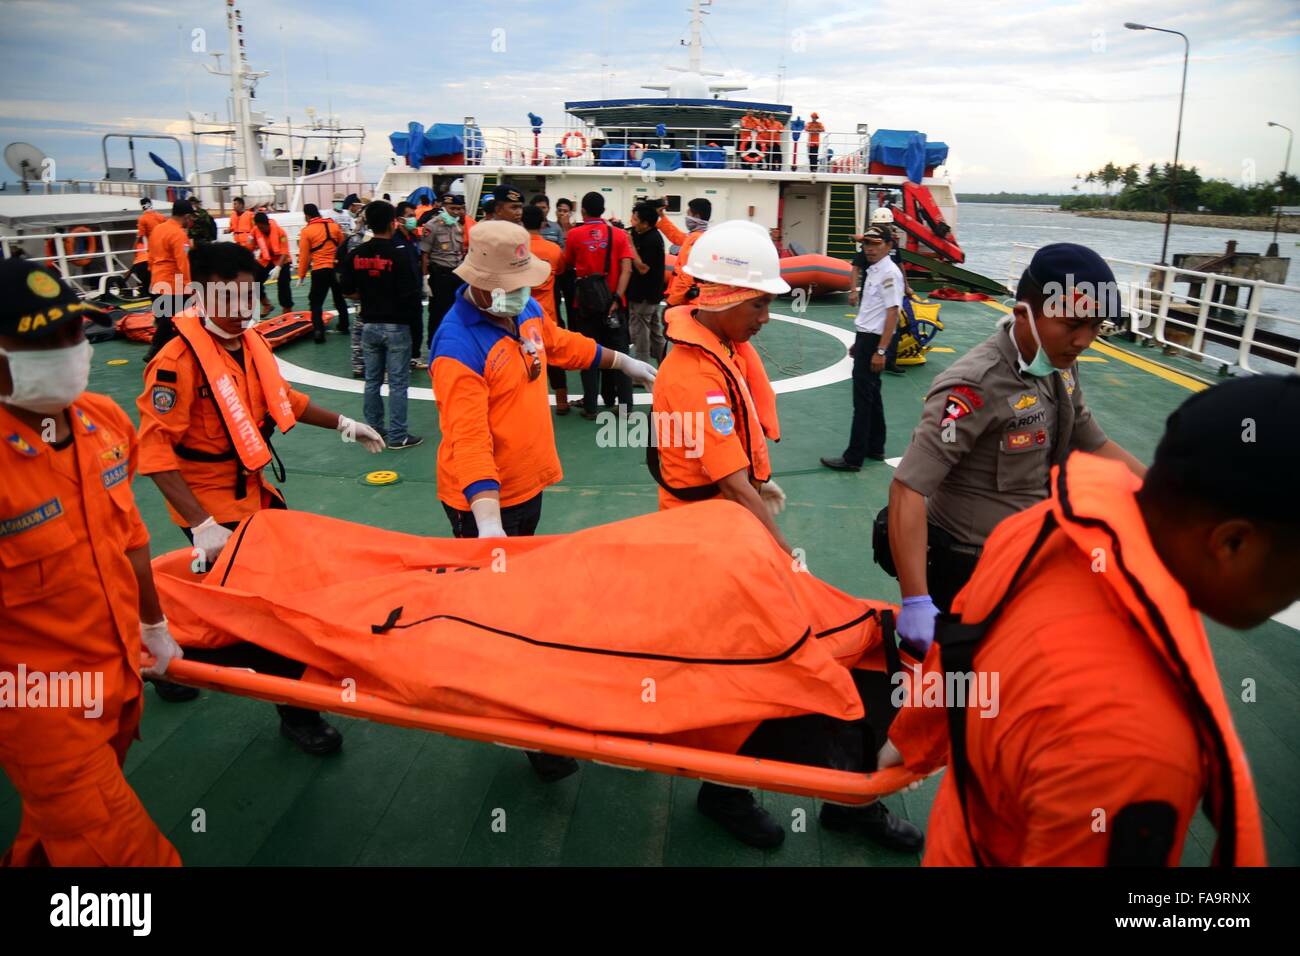 Sulawesi, Indonesia. 24th Dec, 2015. Members of Search and Rescue (SAR) team transfer bodies of the victims in South Sulawesi, Indonesia, Dec. 24, 2015. Rescuers have recovered 63 bodies and kept searching for 15 missing people whose chance of survival was slim five days after a boat sank in eastern Indonesia, officials said on Thursday. Credit:  Lukas/Xinhua/Alamy Live News Stock Photo